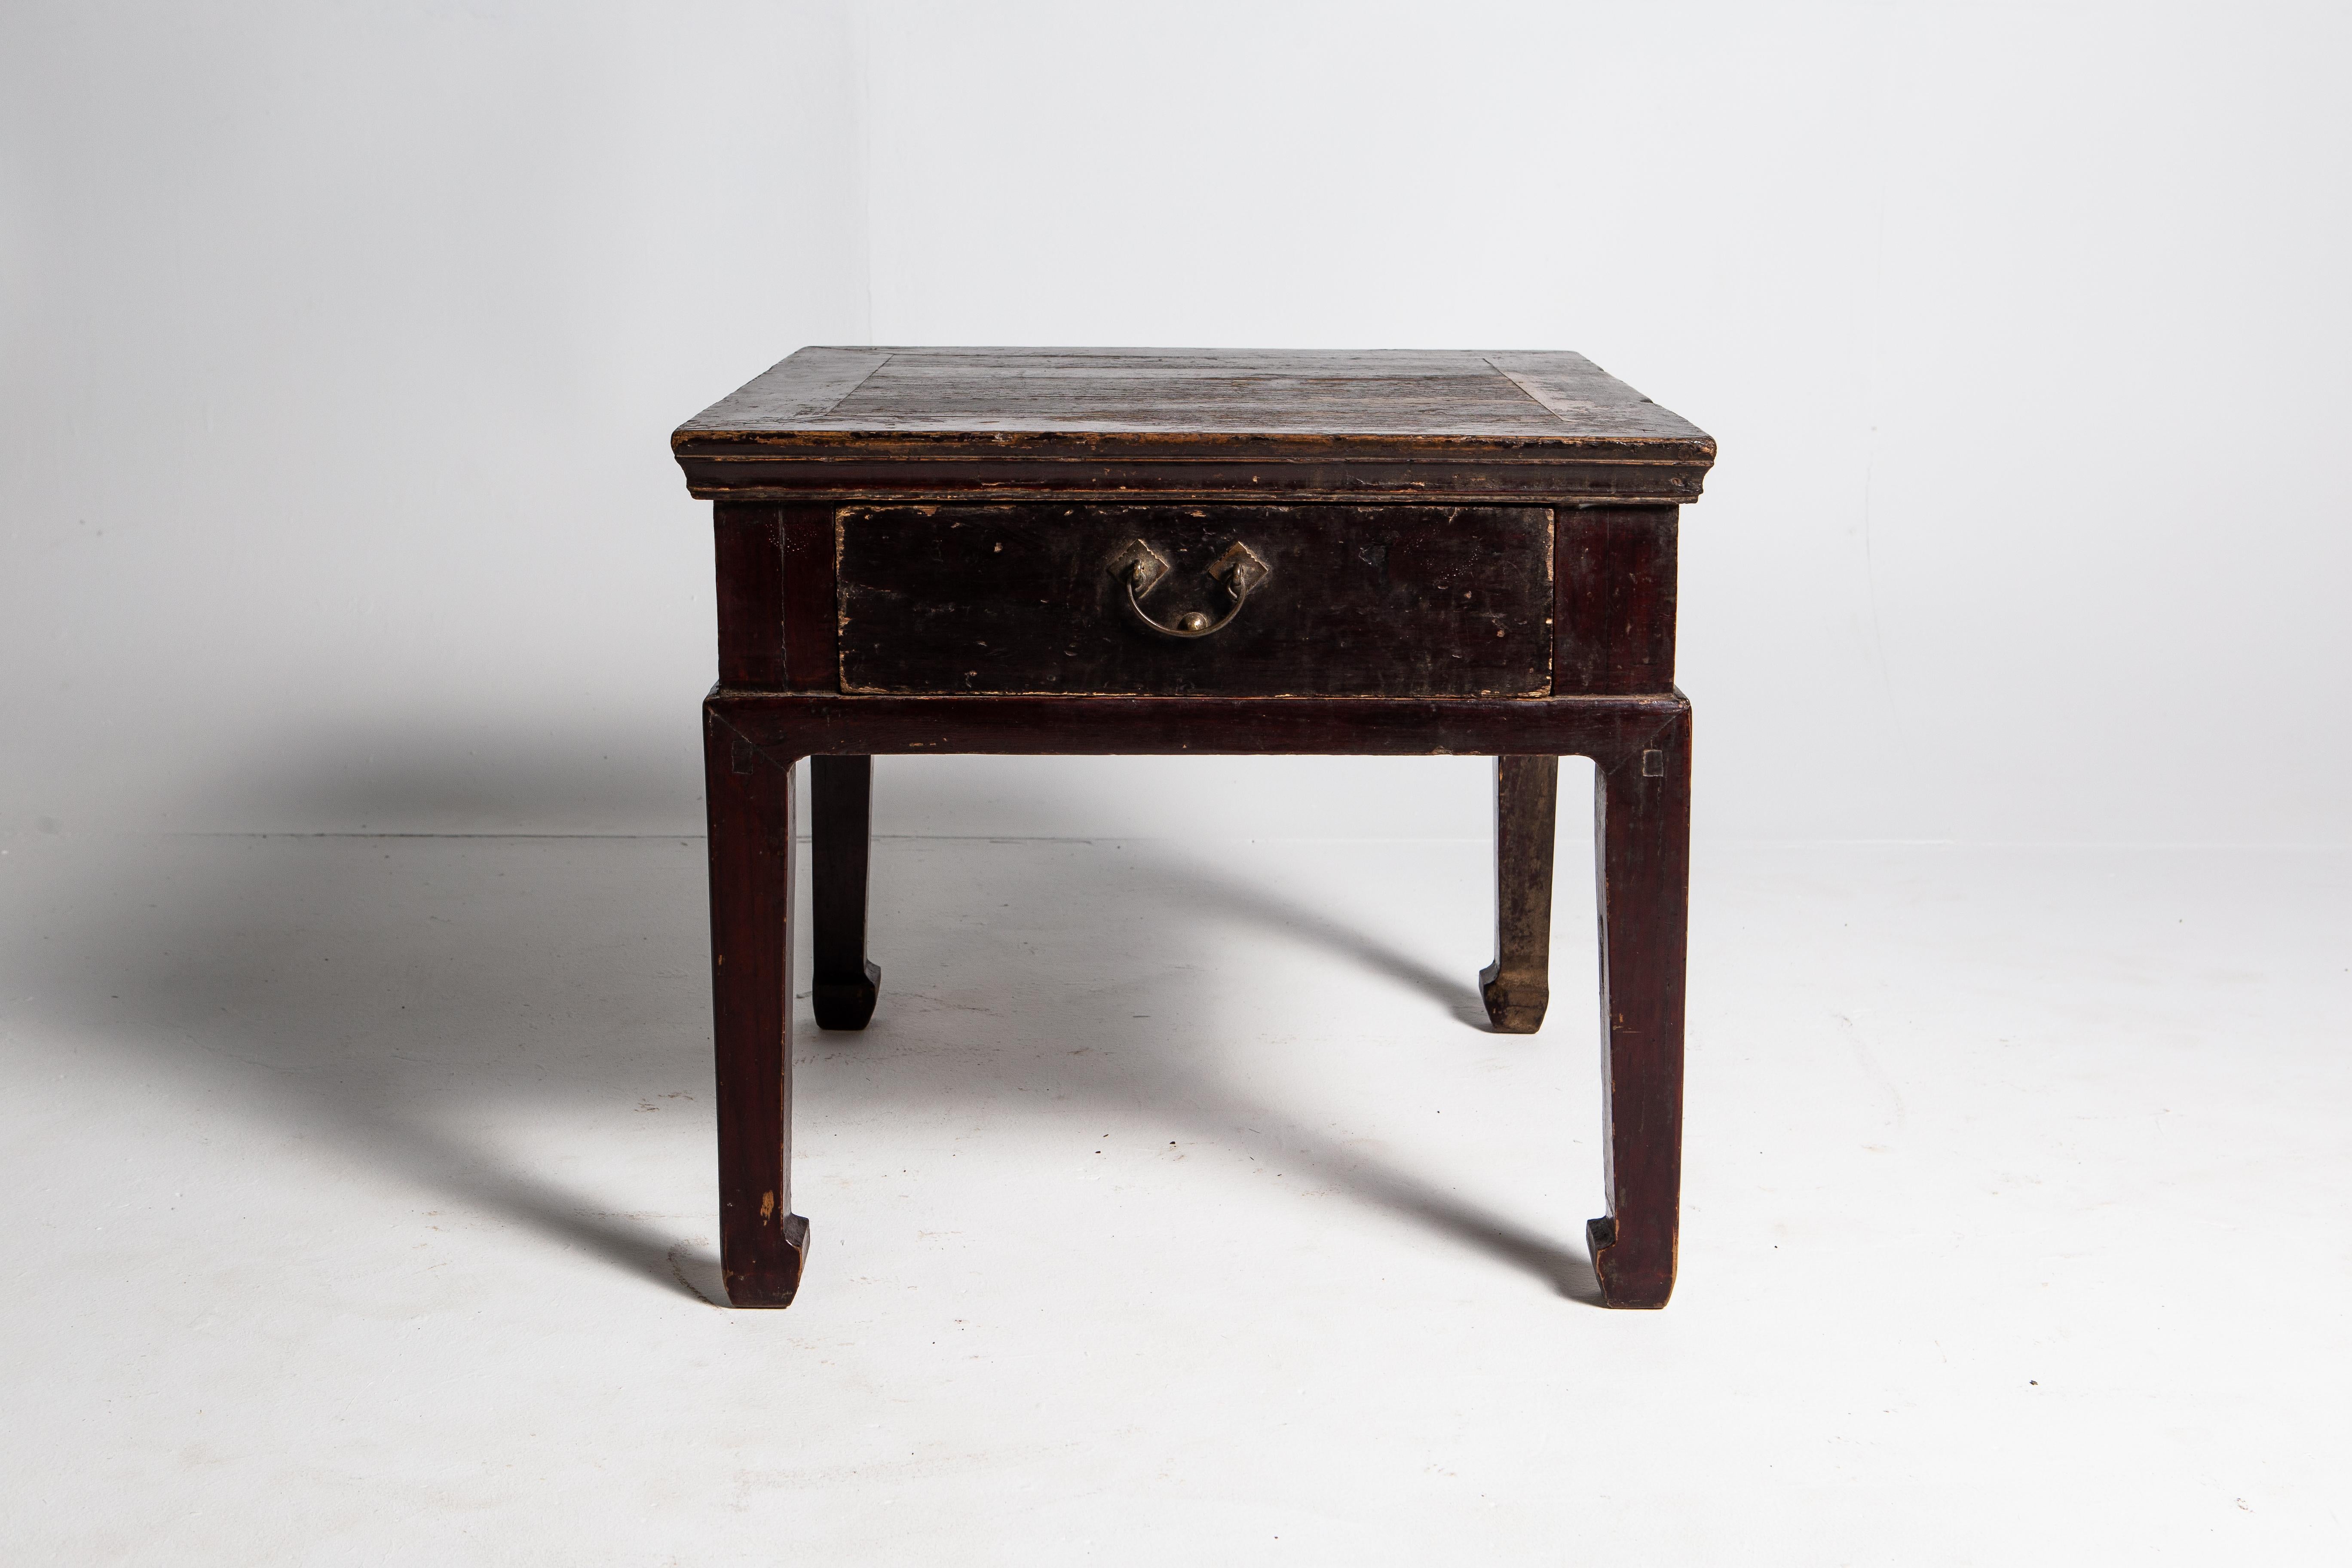 Chinese Late Qing Dynasty Small Square Table with Drawer